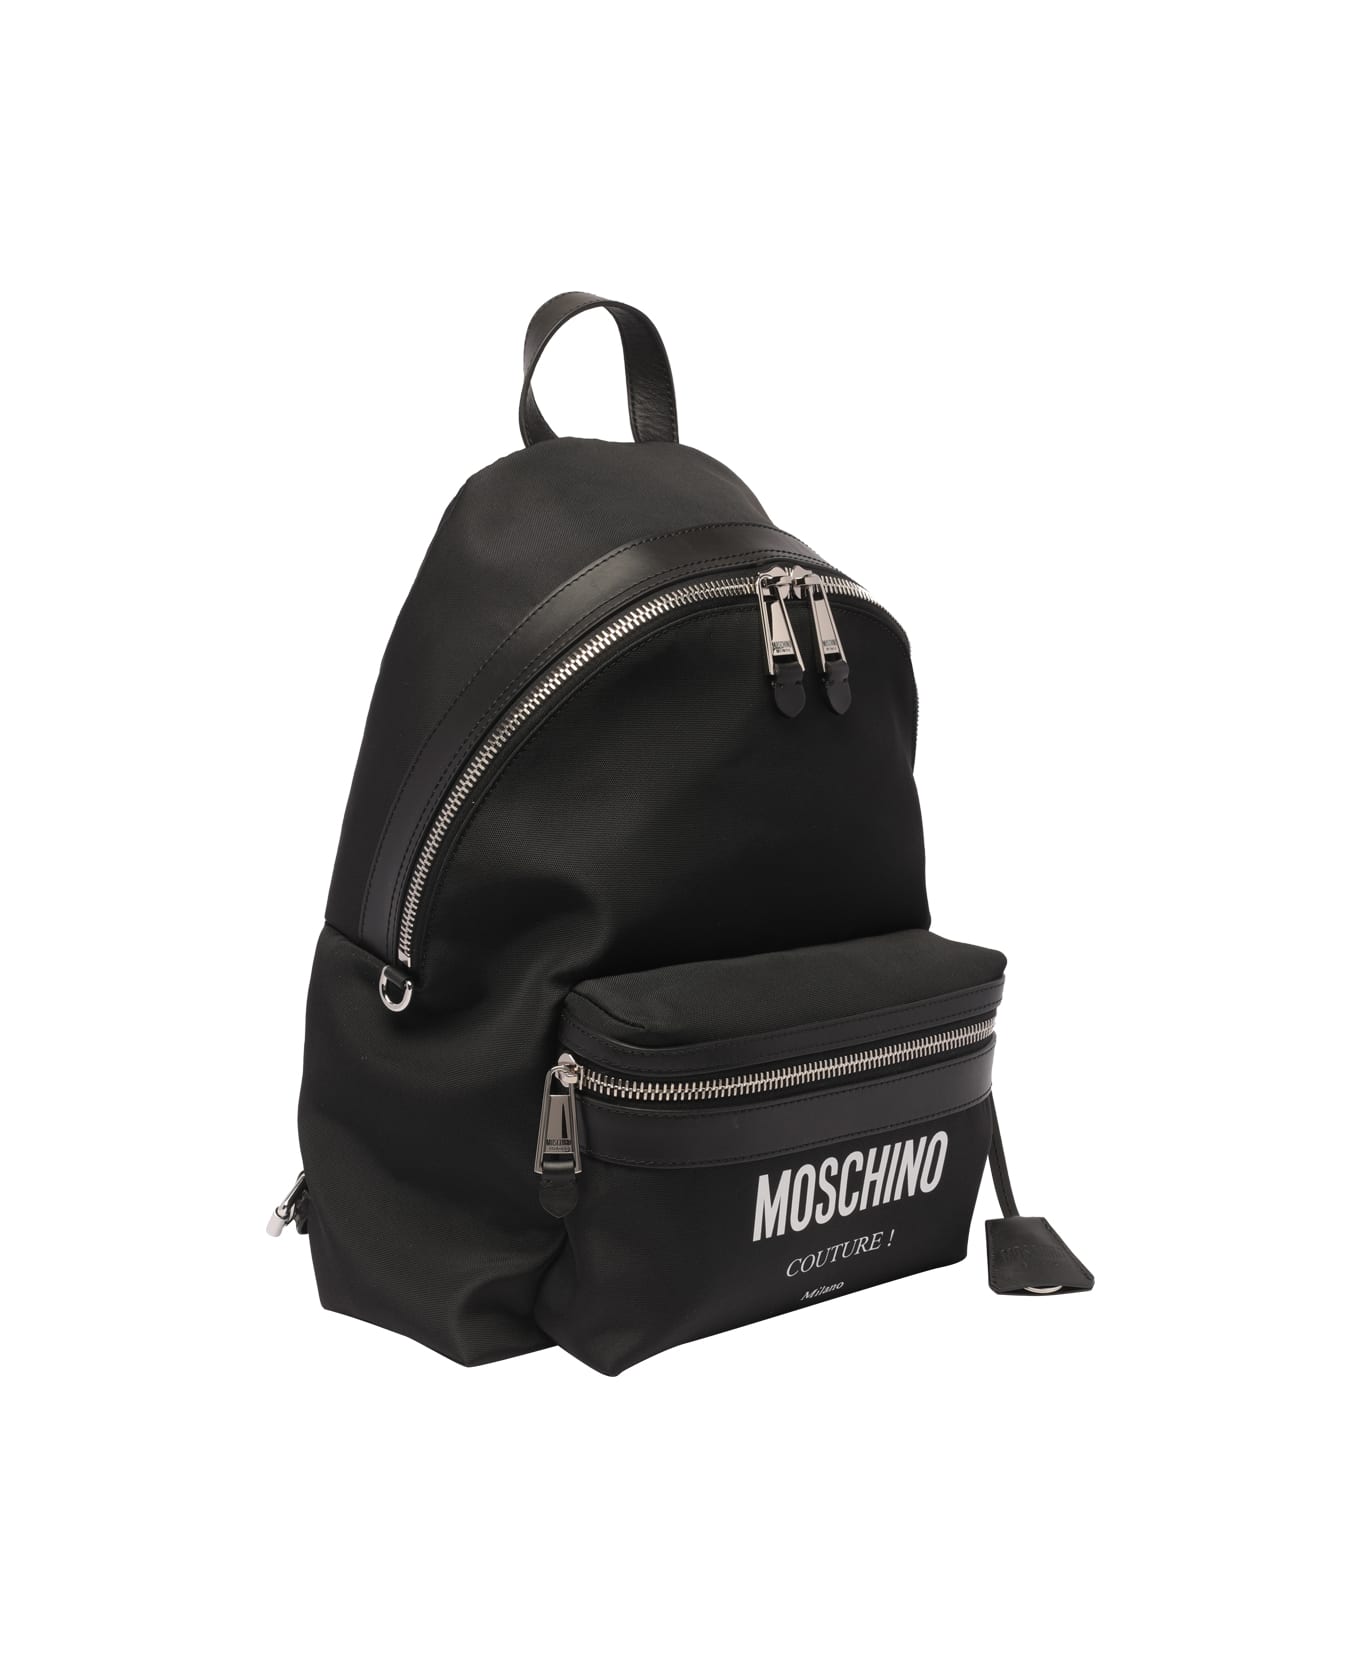 Moschino Couture Backpack - Black